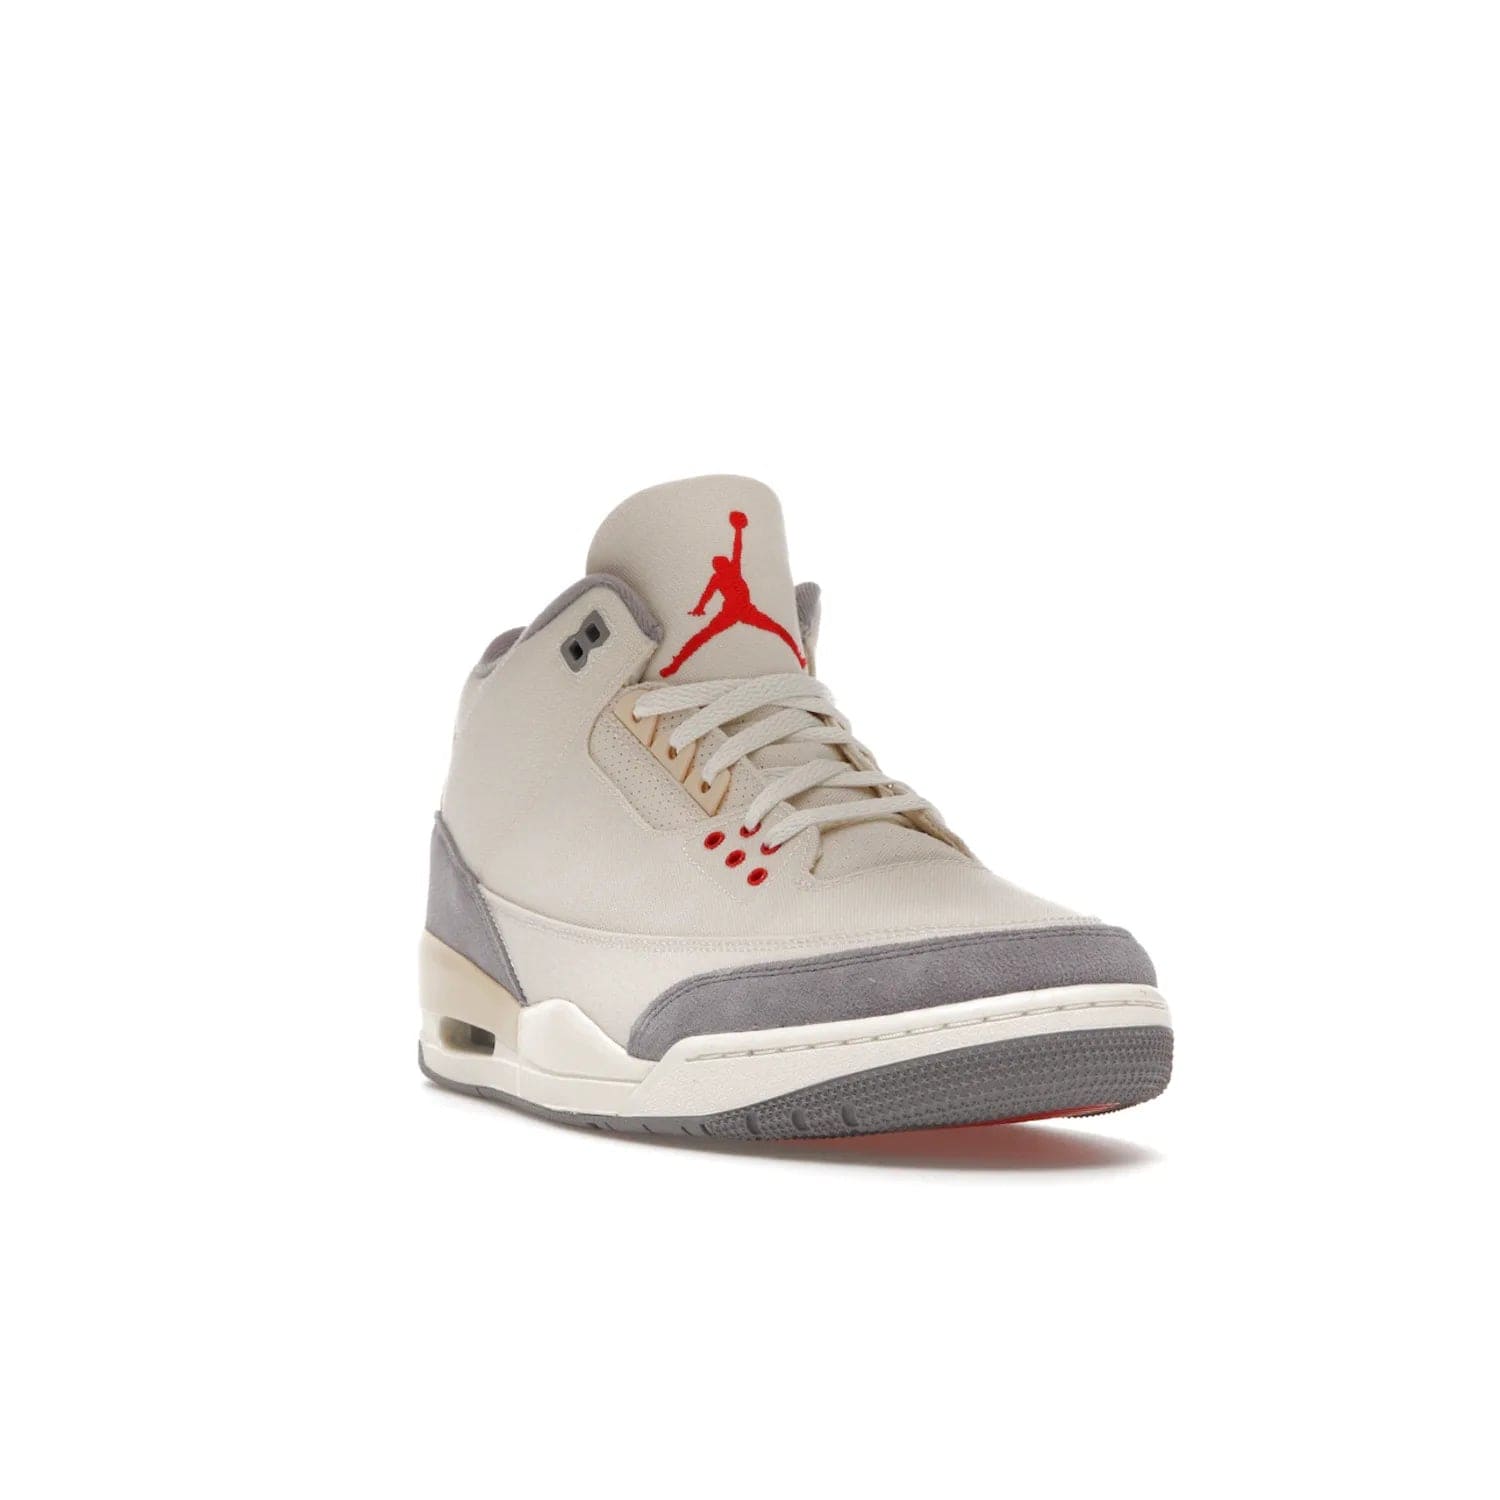 Jordan 3 Retro Muslin - Image 7 - Only at www.BallersClubKickz.com - Eye-catching Air Jordan 3 Retro Muslin in a neutral palette of grey, cream, and red. Featuring canvas upper, suede overlays and white/grey Air Max sole. Available in March 2022.